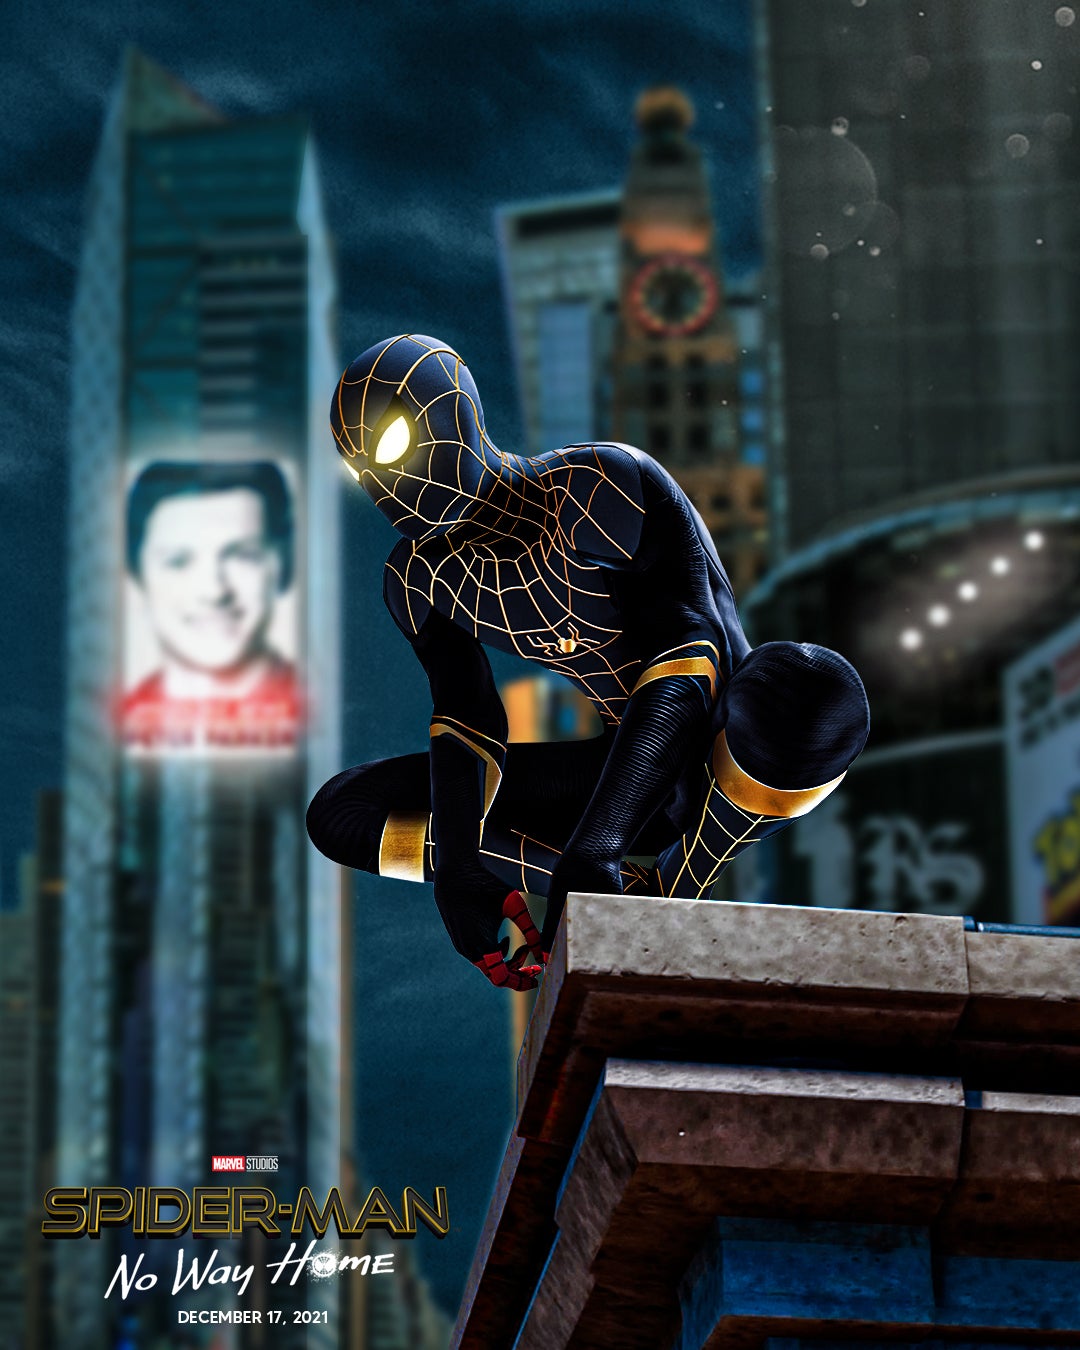 SPIDER MAN NO WAY HOME, Black & Gold Suit Poster Designed By Me